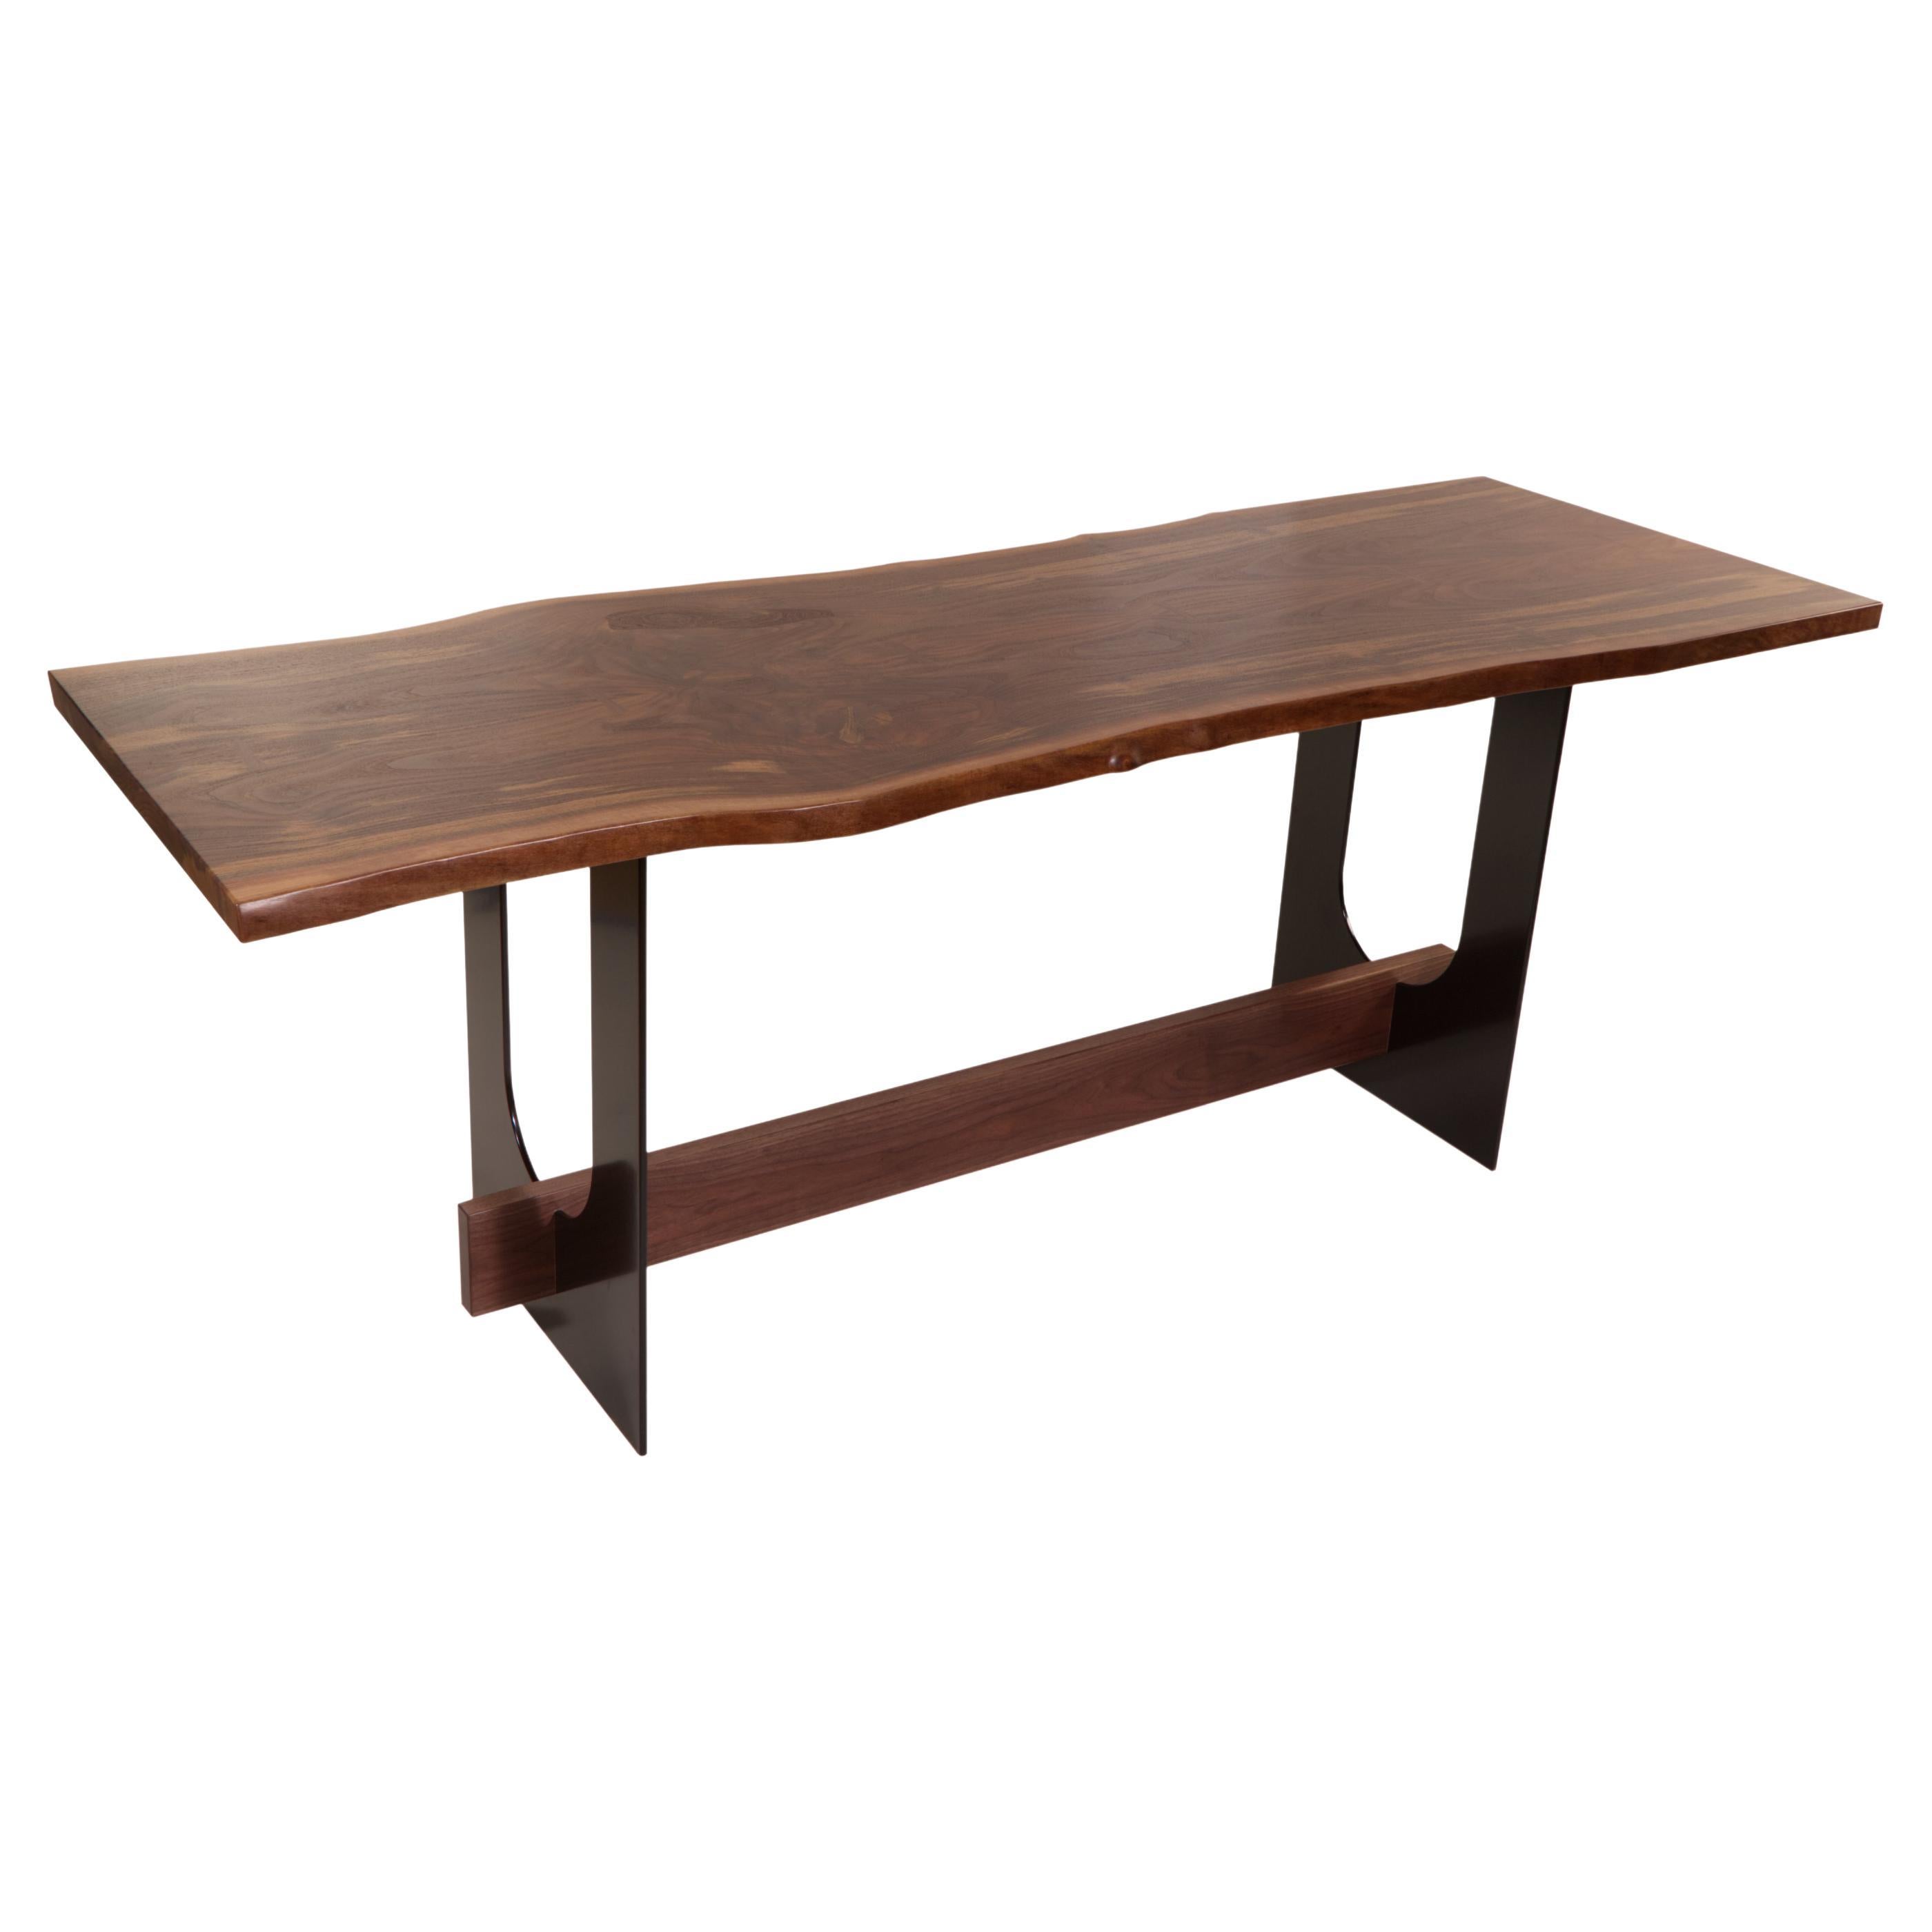 Industrial and Refined; these two words properly describe the Menlo Table. With a top of beautiful Walnut resting upon an pair of solid steel legs, this simple design fits well in any space from the most contemporary to the most rustic. 

The top